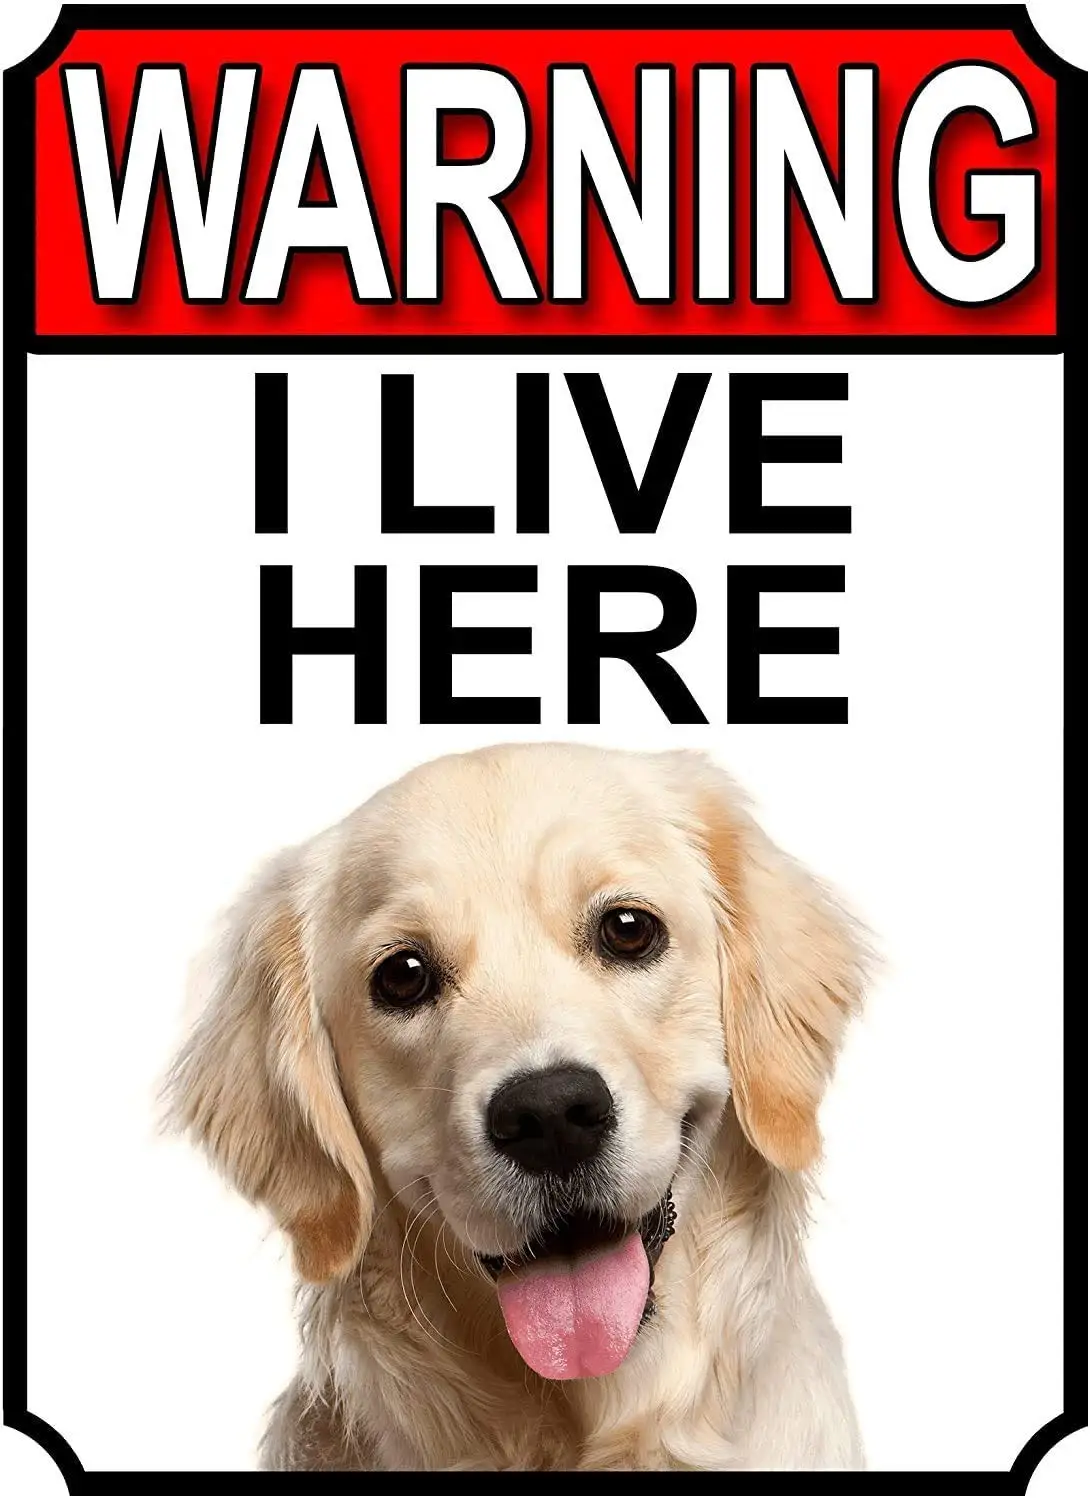 

Funny Warning Signs Metal Safety Signs for Home 12X8in, Warning I Live HERE Metal GATE Sign Golden Retriever,Art Decor for